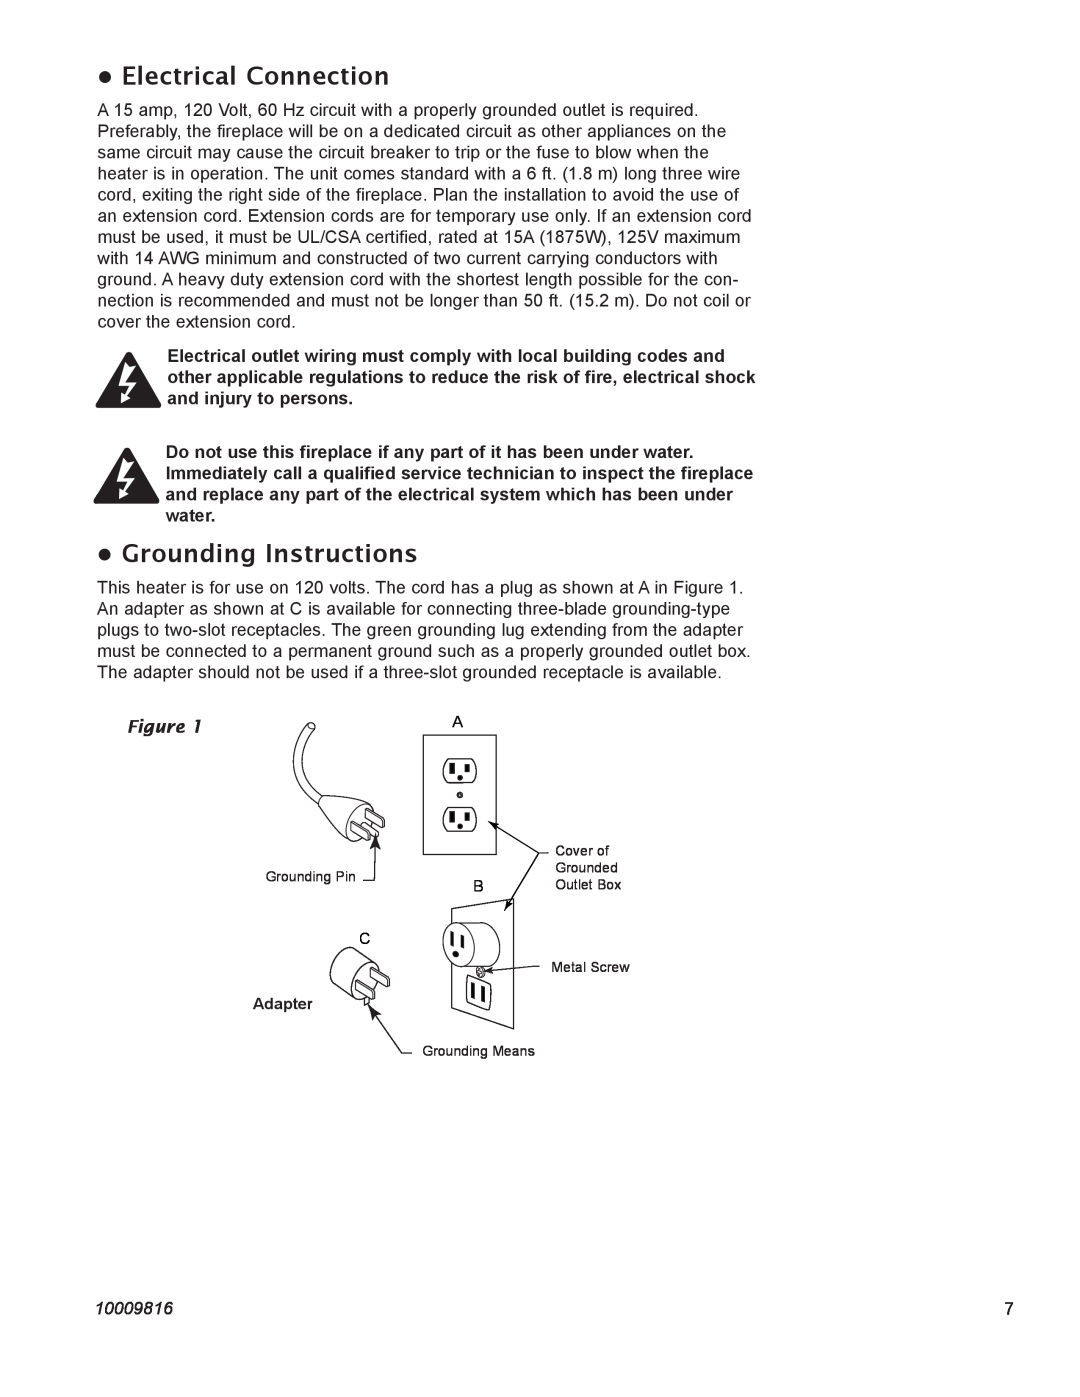 Vermont Casting EF22, EF26FG operating instructions Electrical Connection, Grounding Instructions, 10009816 